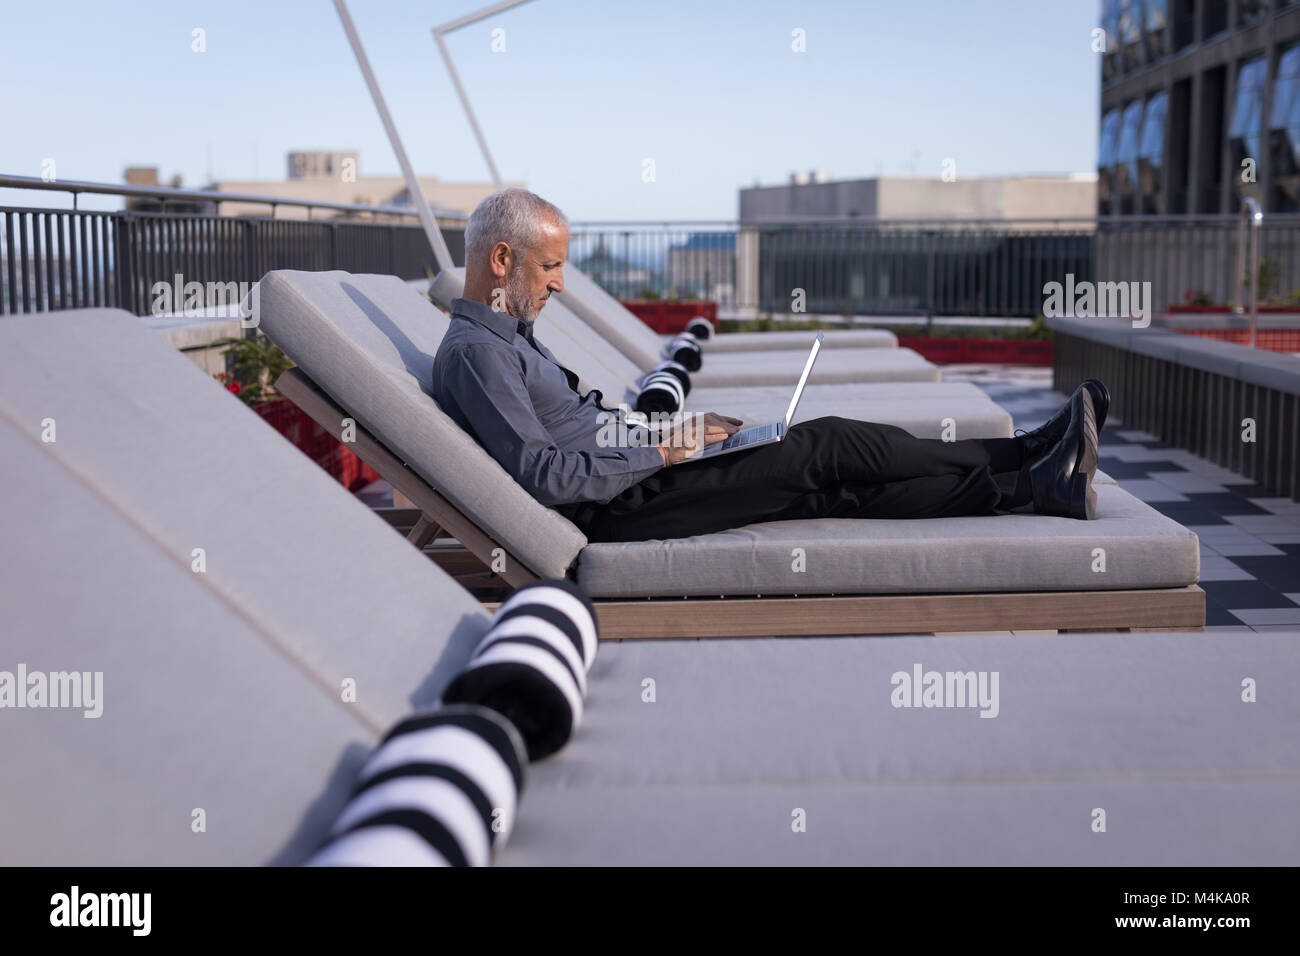 Businessman using a laptop while resting on a sun lounger Stock Photo